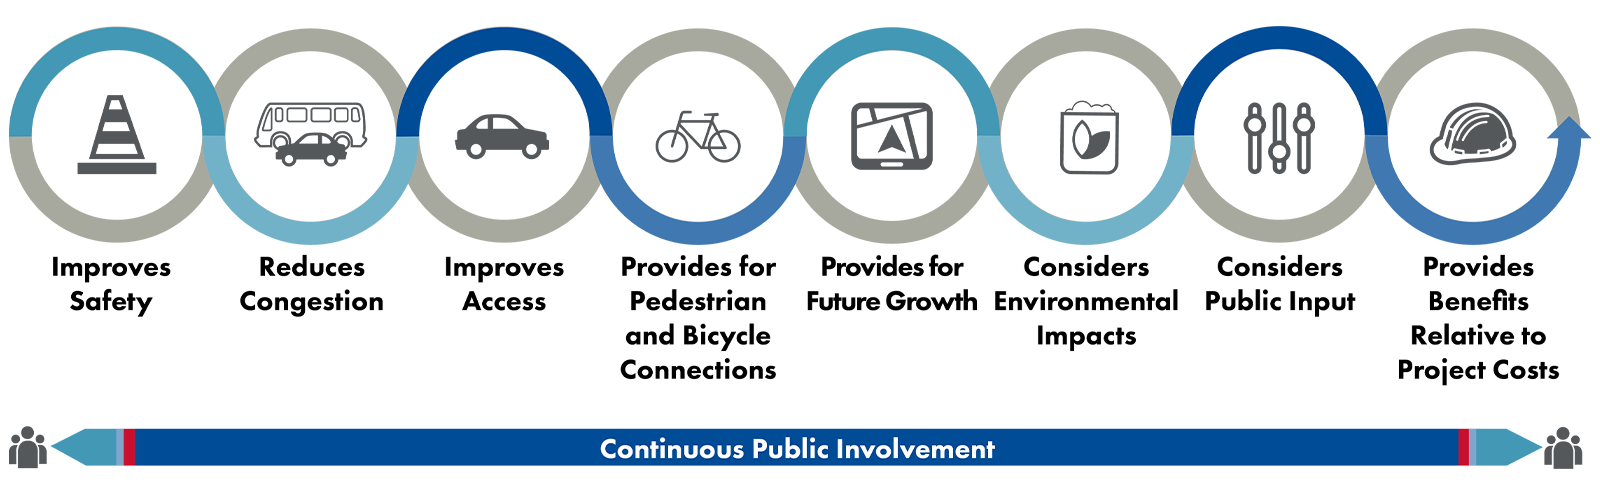 Alternatives are analyzed and screened to determine if they improve safety, reduce congestion, improve access, provides for pedestrian and bicycle connections, provides for future growth, consider environmental impacts, consider public input, and provide benefits relative to project cost. Public involvement is continous throughout analysis and screening.